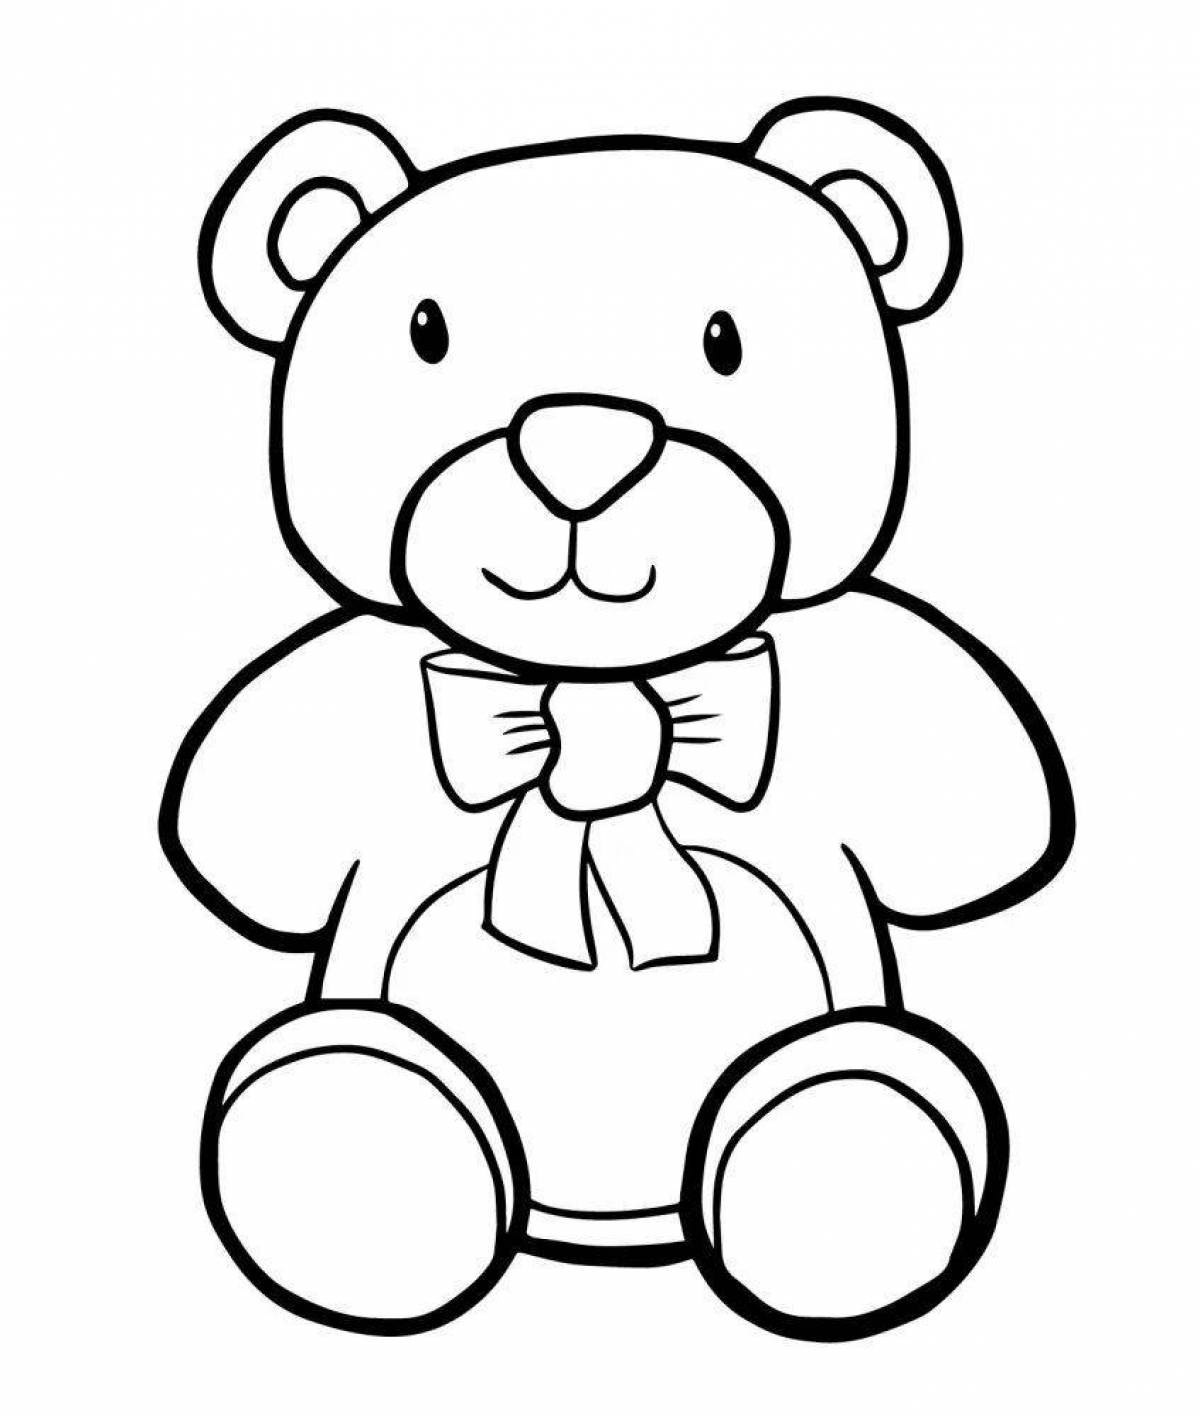 Shiny Teddy Bear coloring page